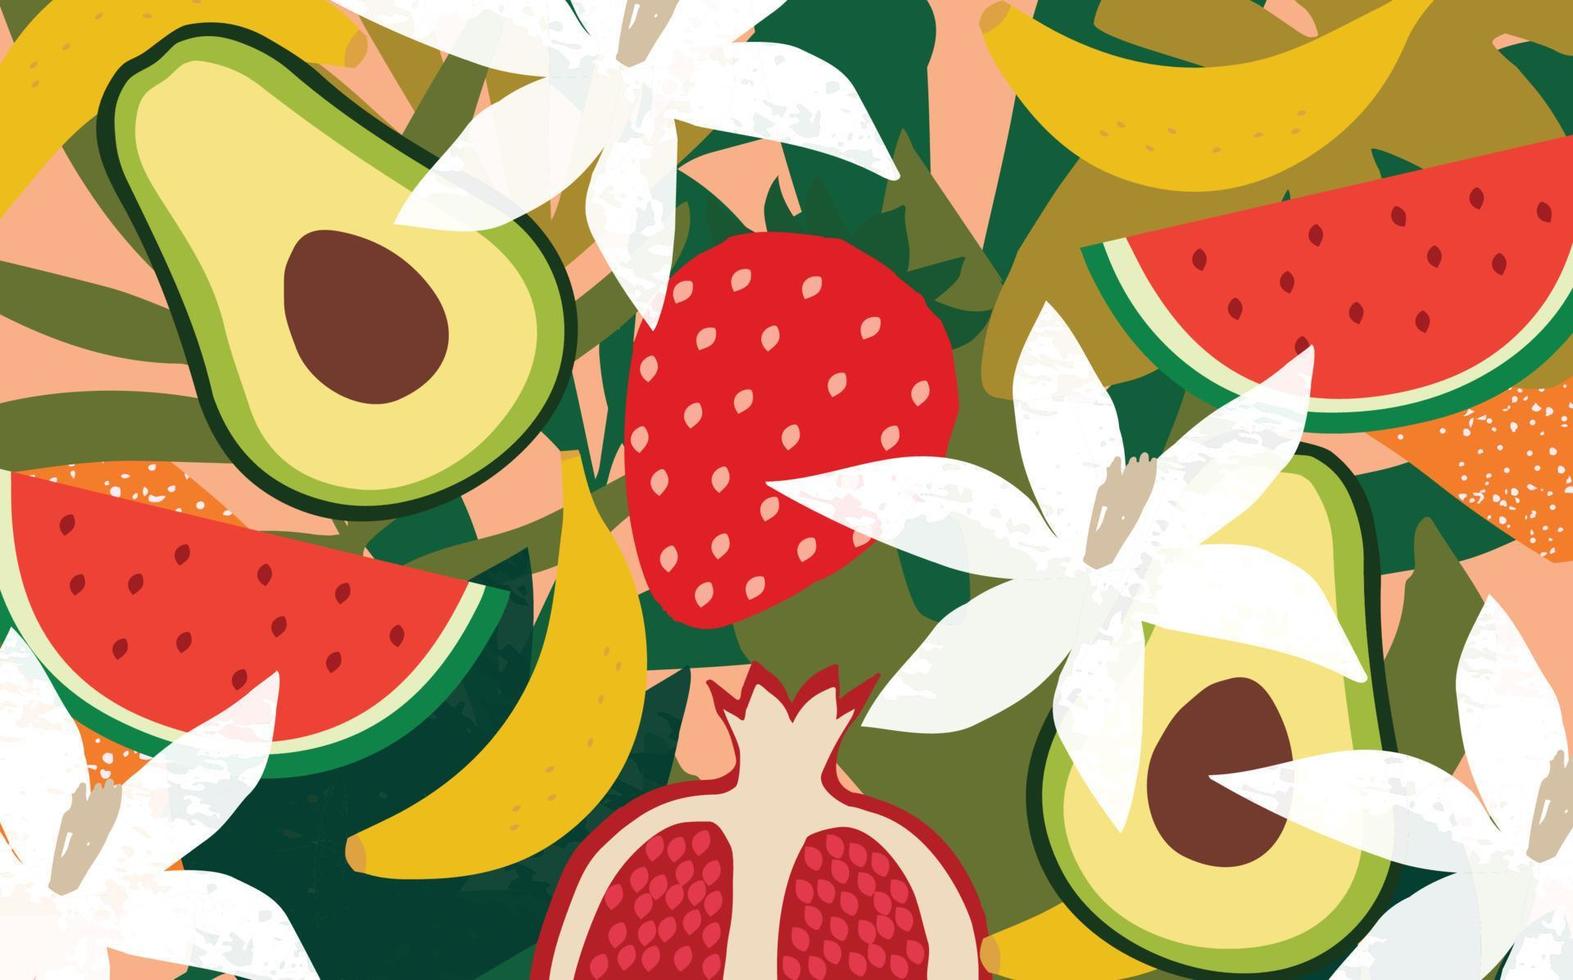 Exotic fruit poster. Summer tropical design with fruit, strawberry, pomegranate, avocado, banana and watermelon colorful mix. Healthy diet, vegan food background vector illustration